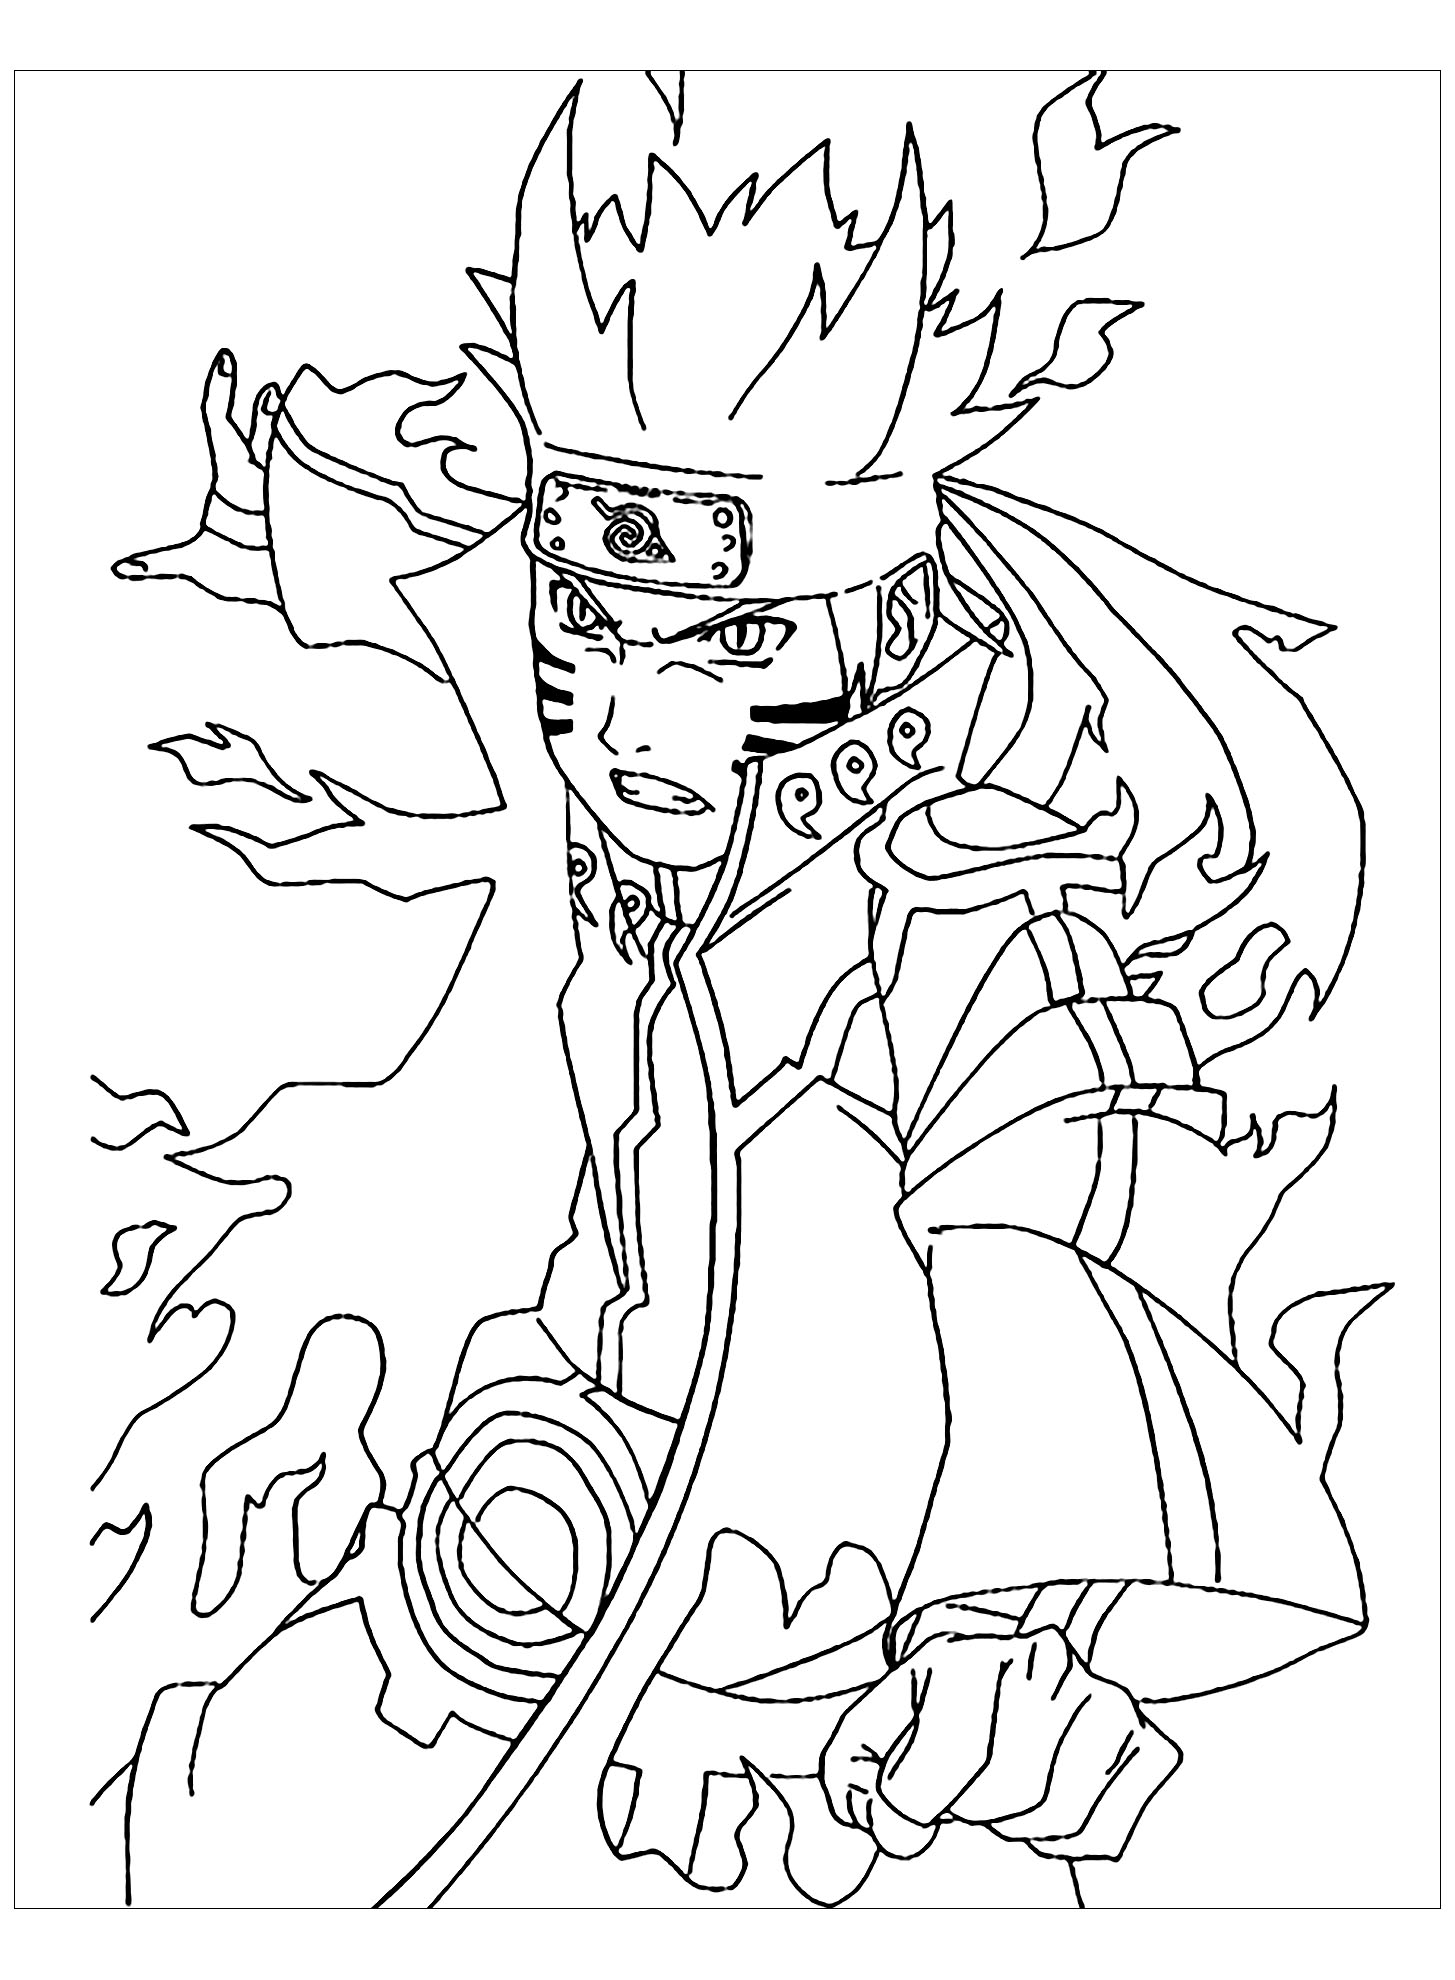 Download Naruto To Download Naruto Kids Coloring Pages